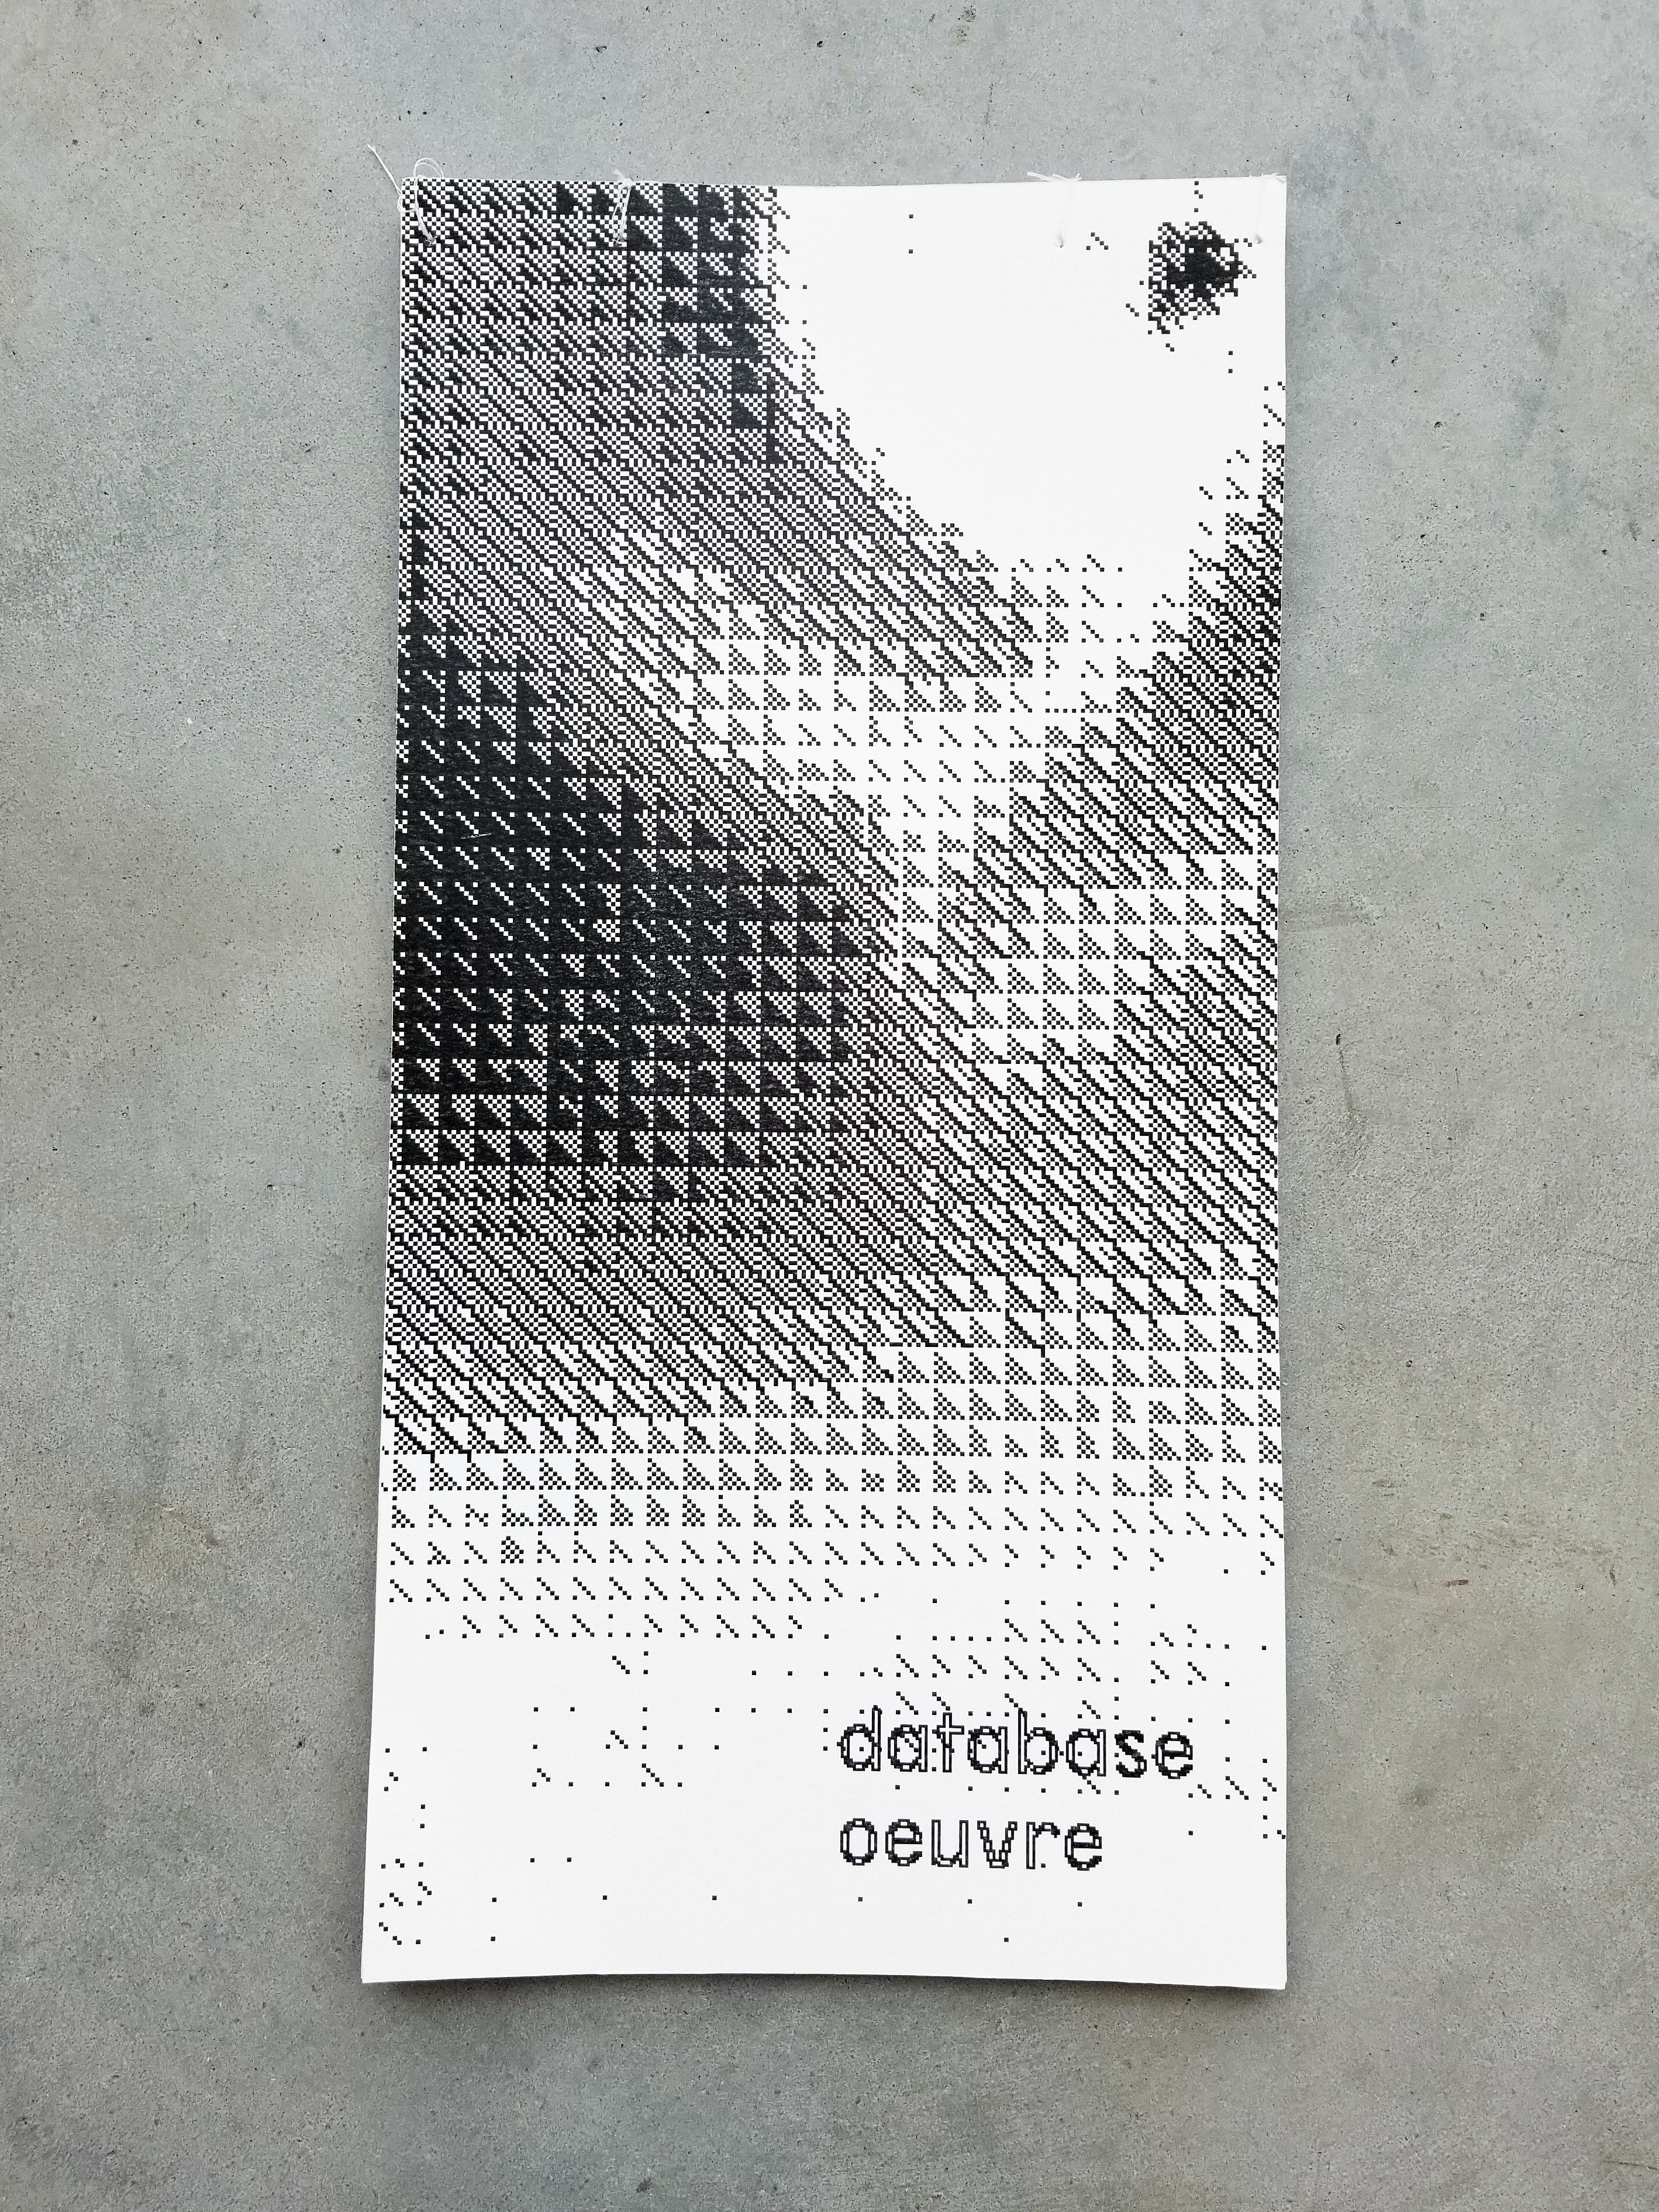 The cover of the book, which seems very tall. It has a black and white graphic that is both digital and organic looking above the title which says 'database ouevre'.